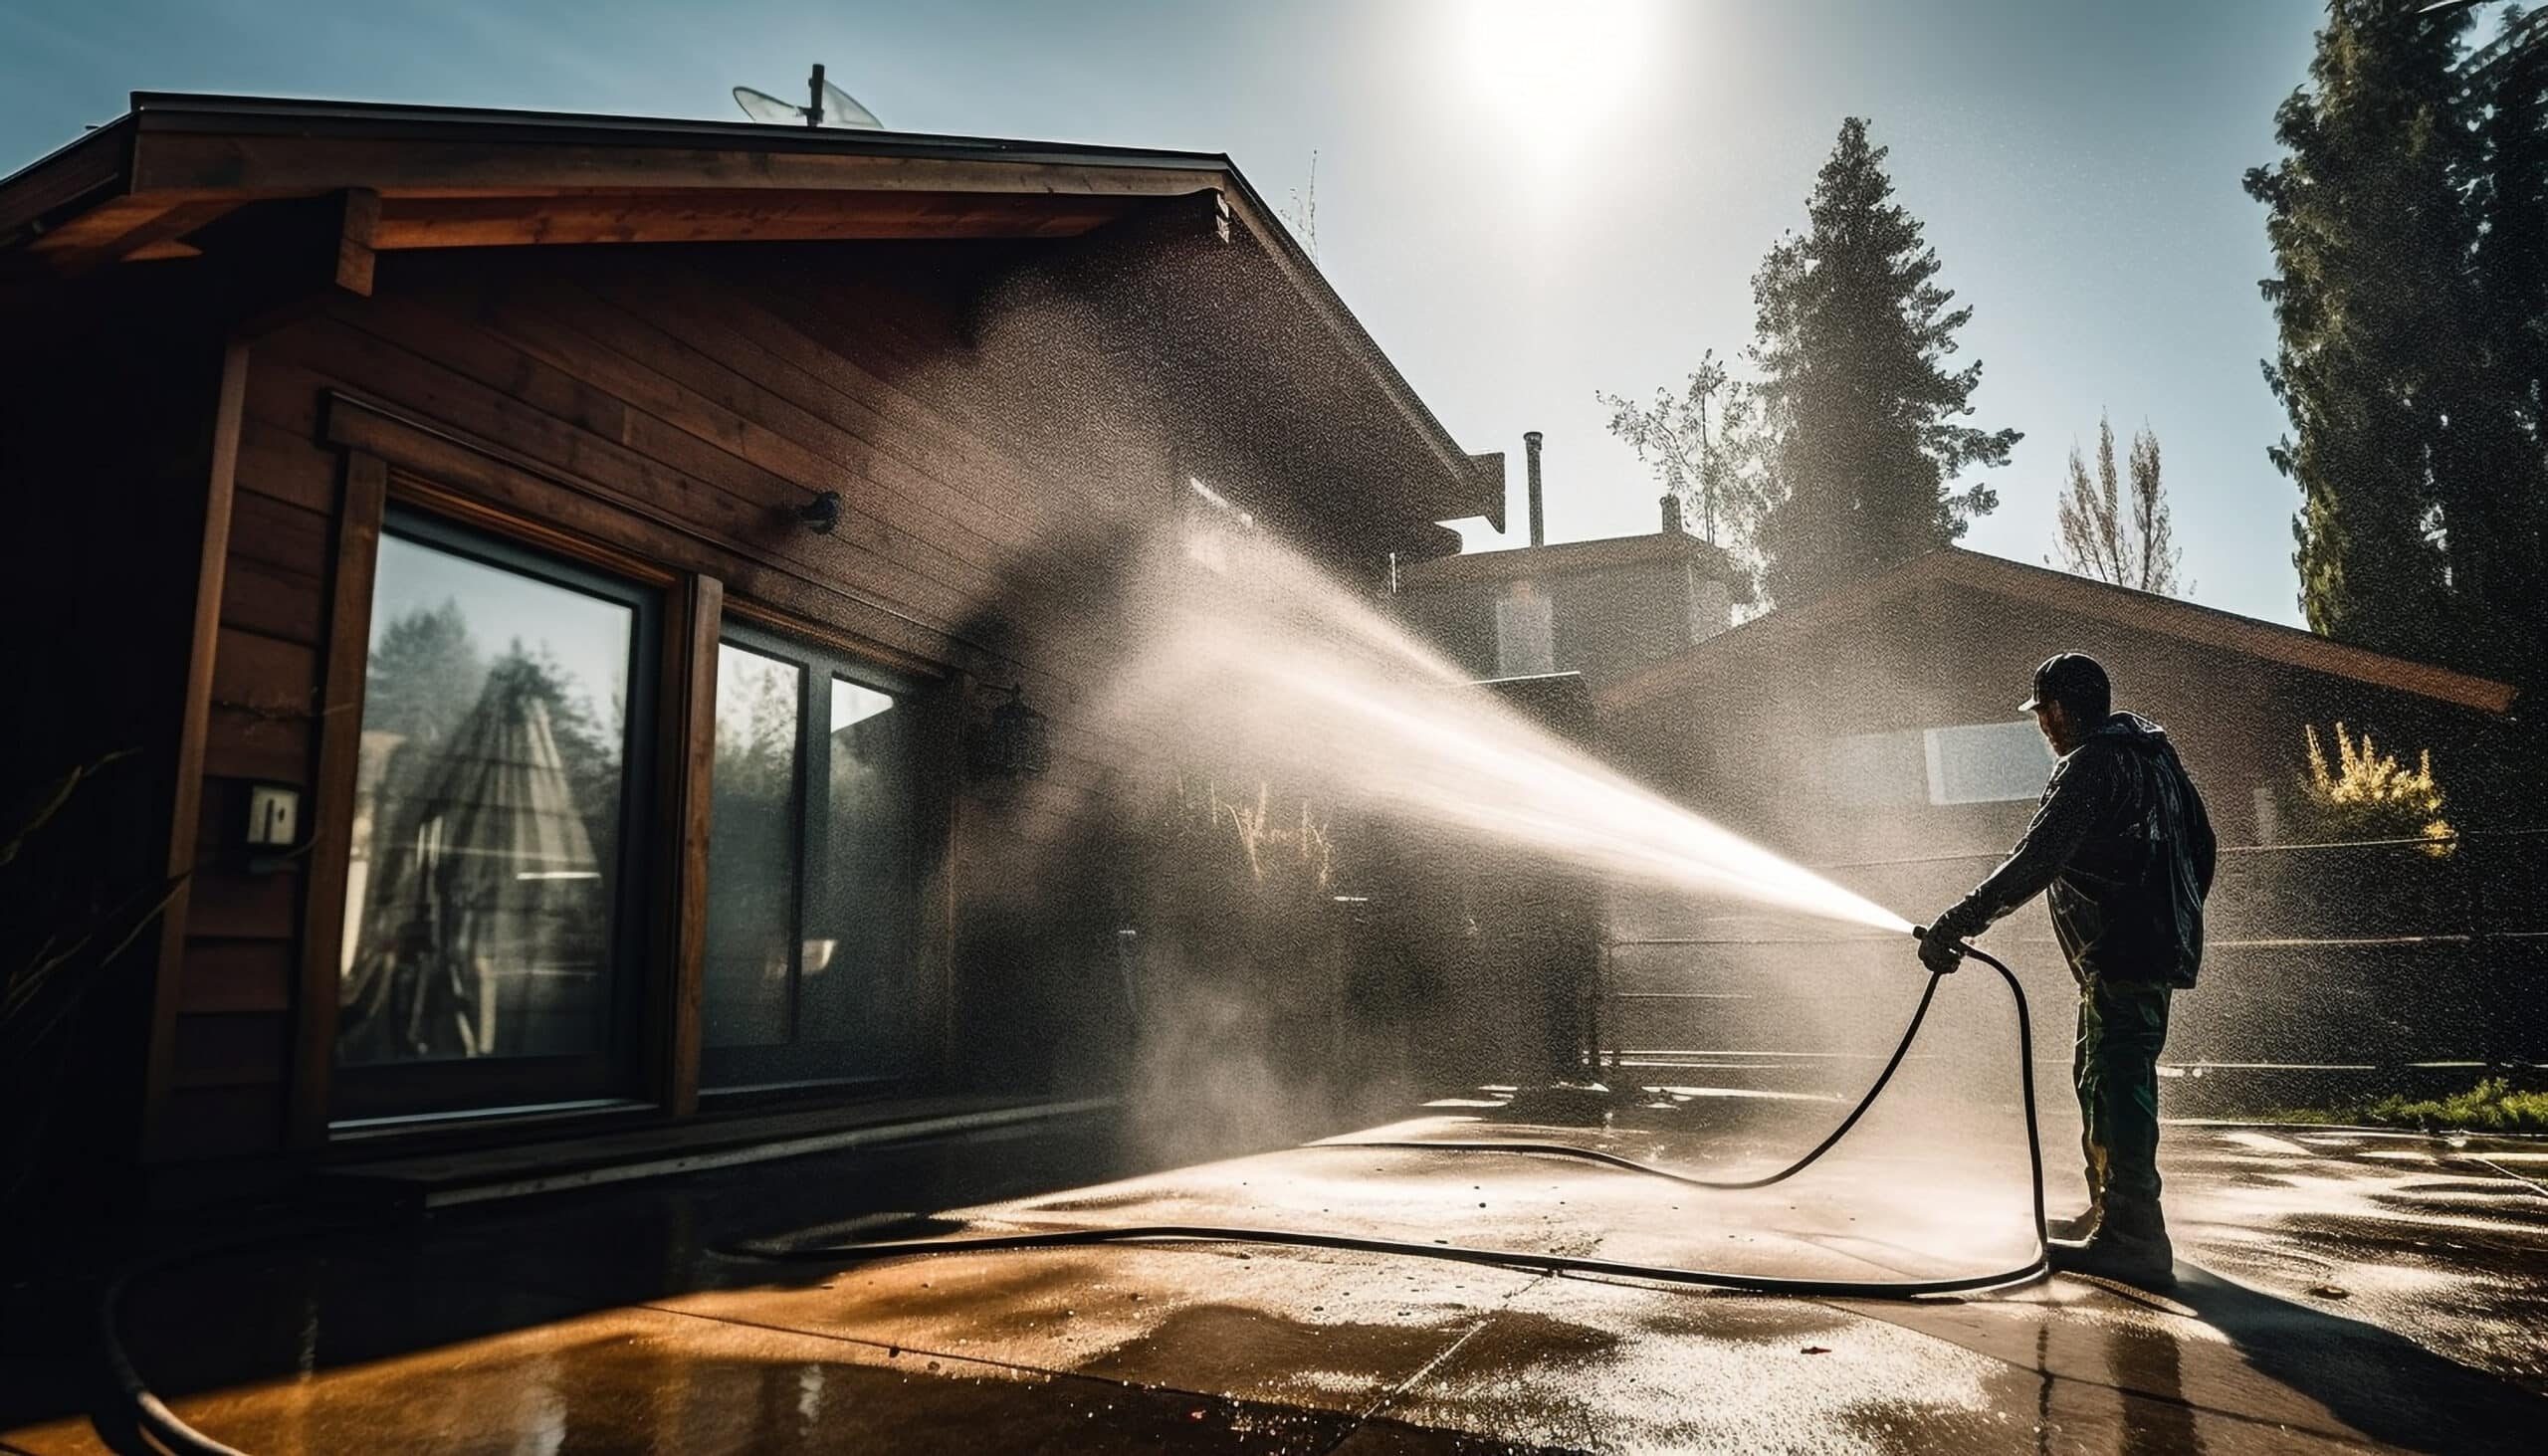 www.appr.com : Are there any safety precautions specific to using a gas pressure washer?